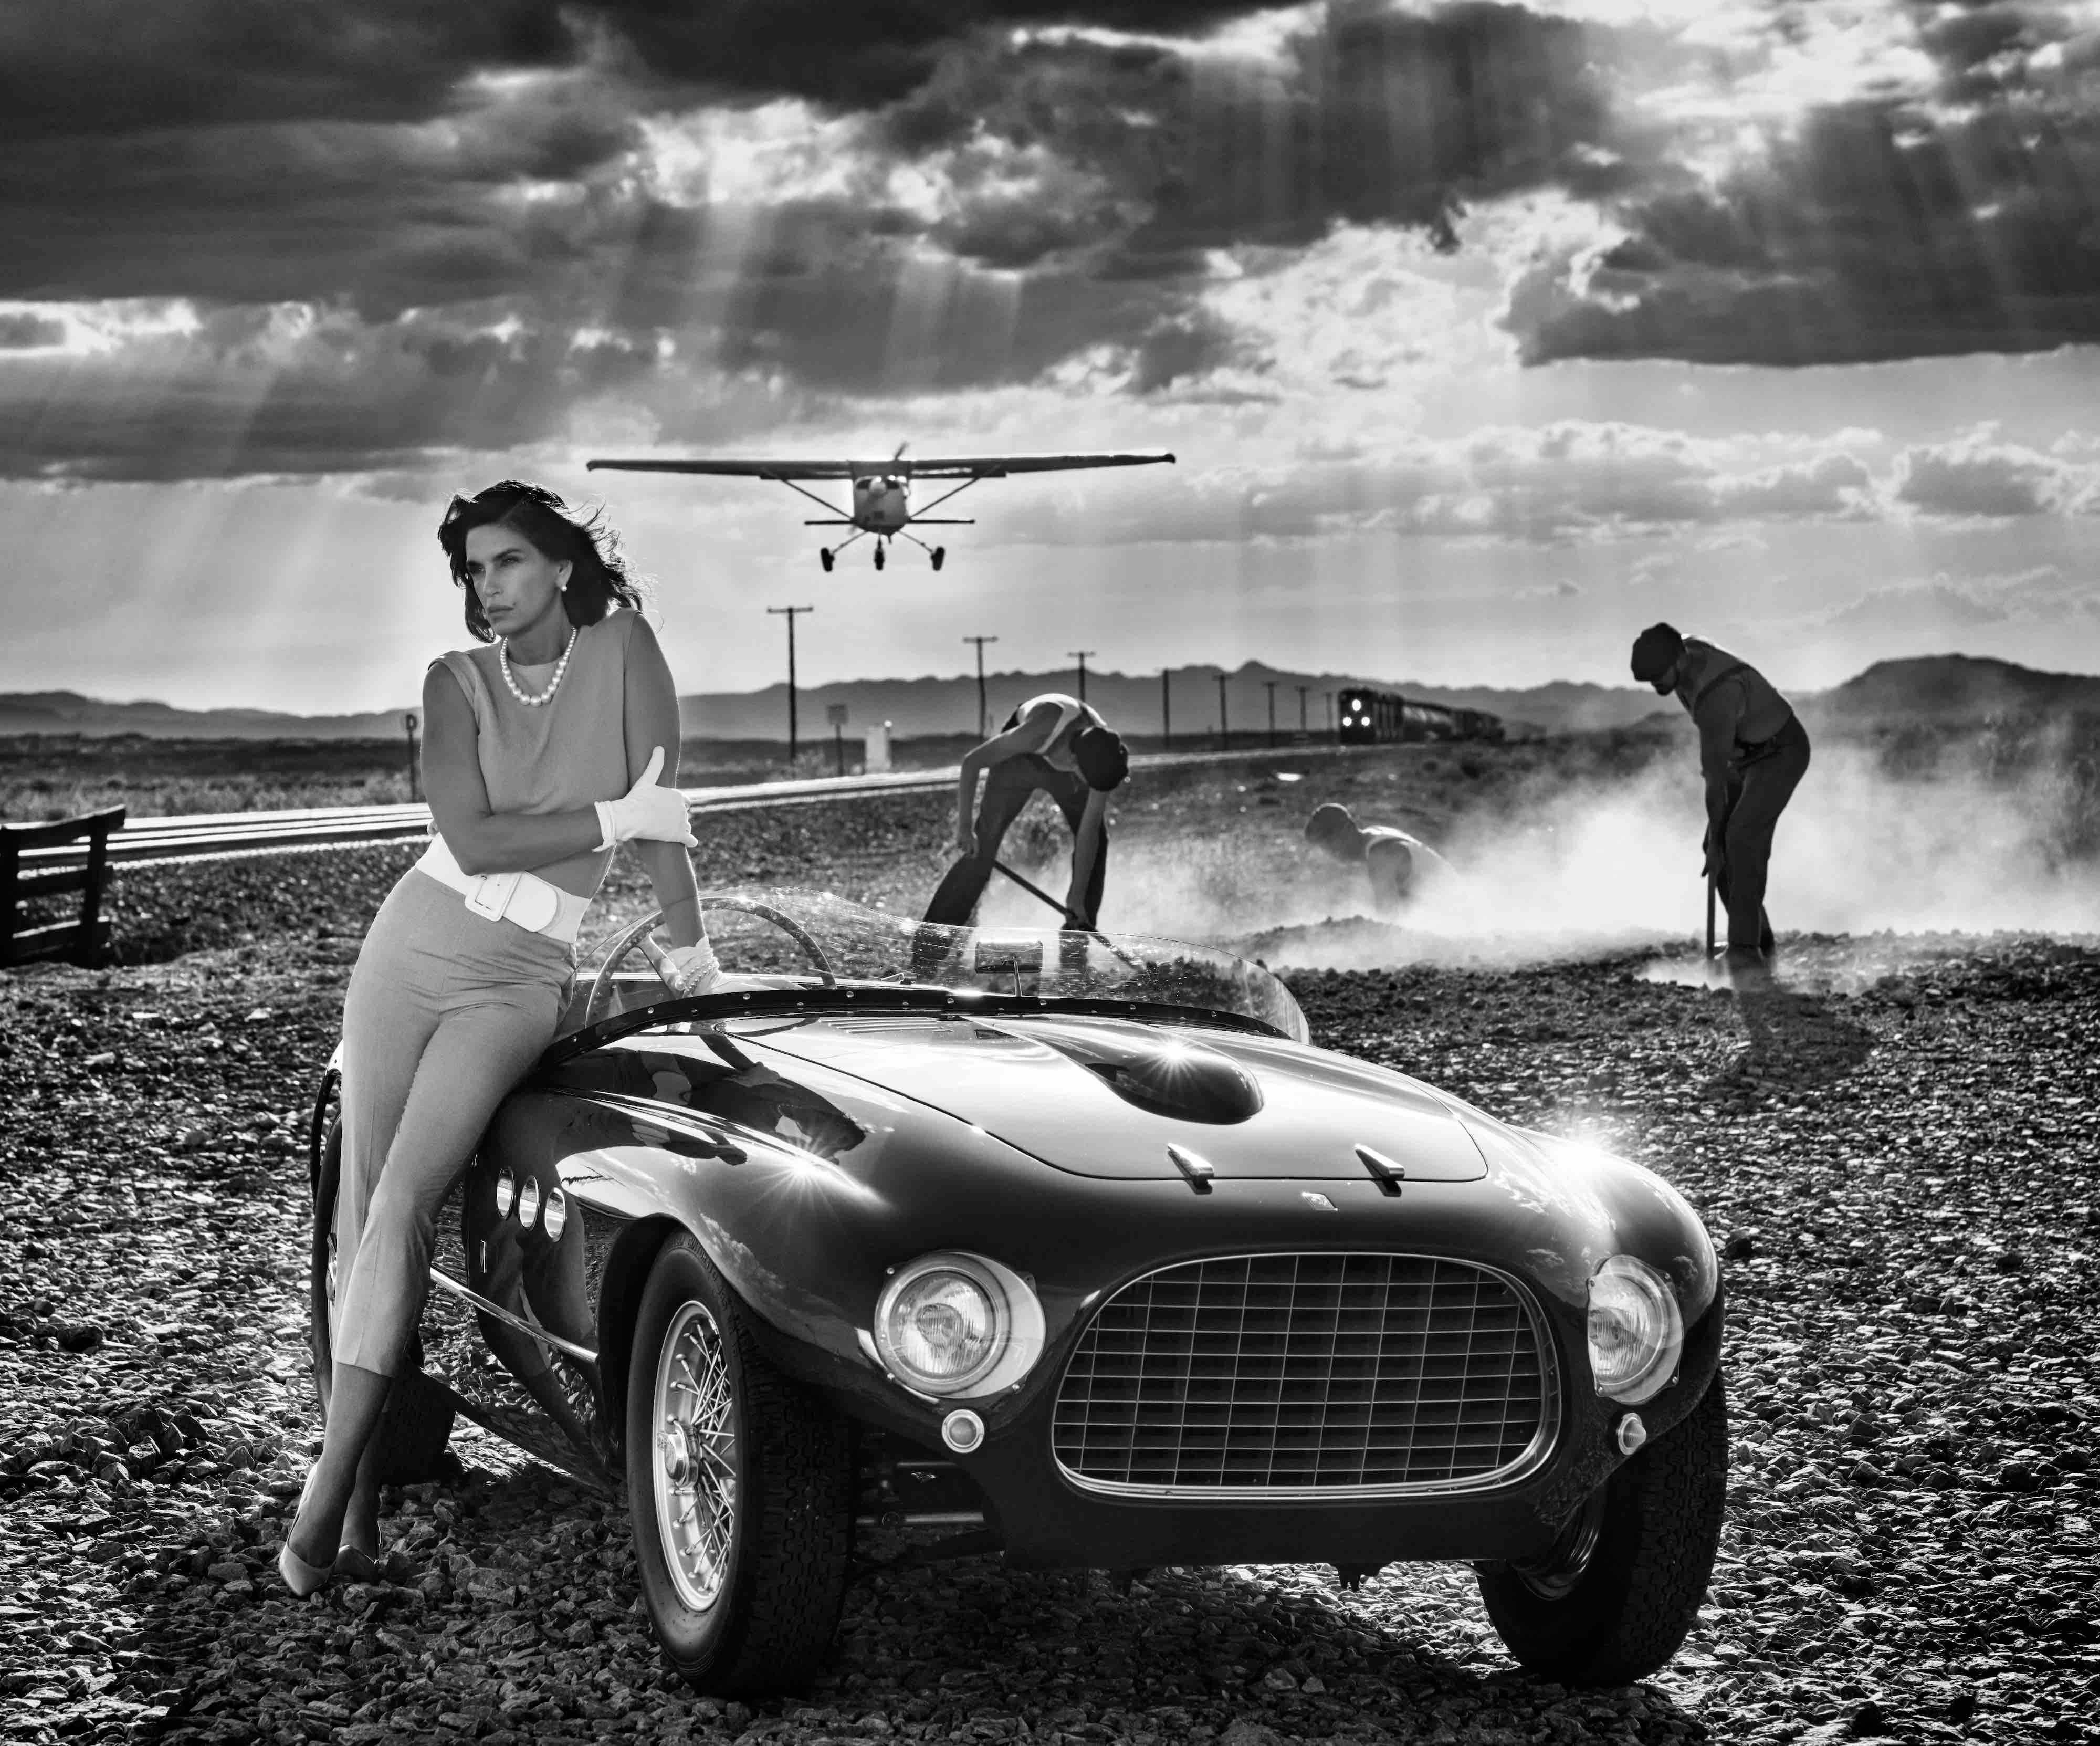 David Yarrow Black and White Photograph - Planes, Trains and Automobiles